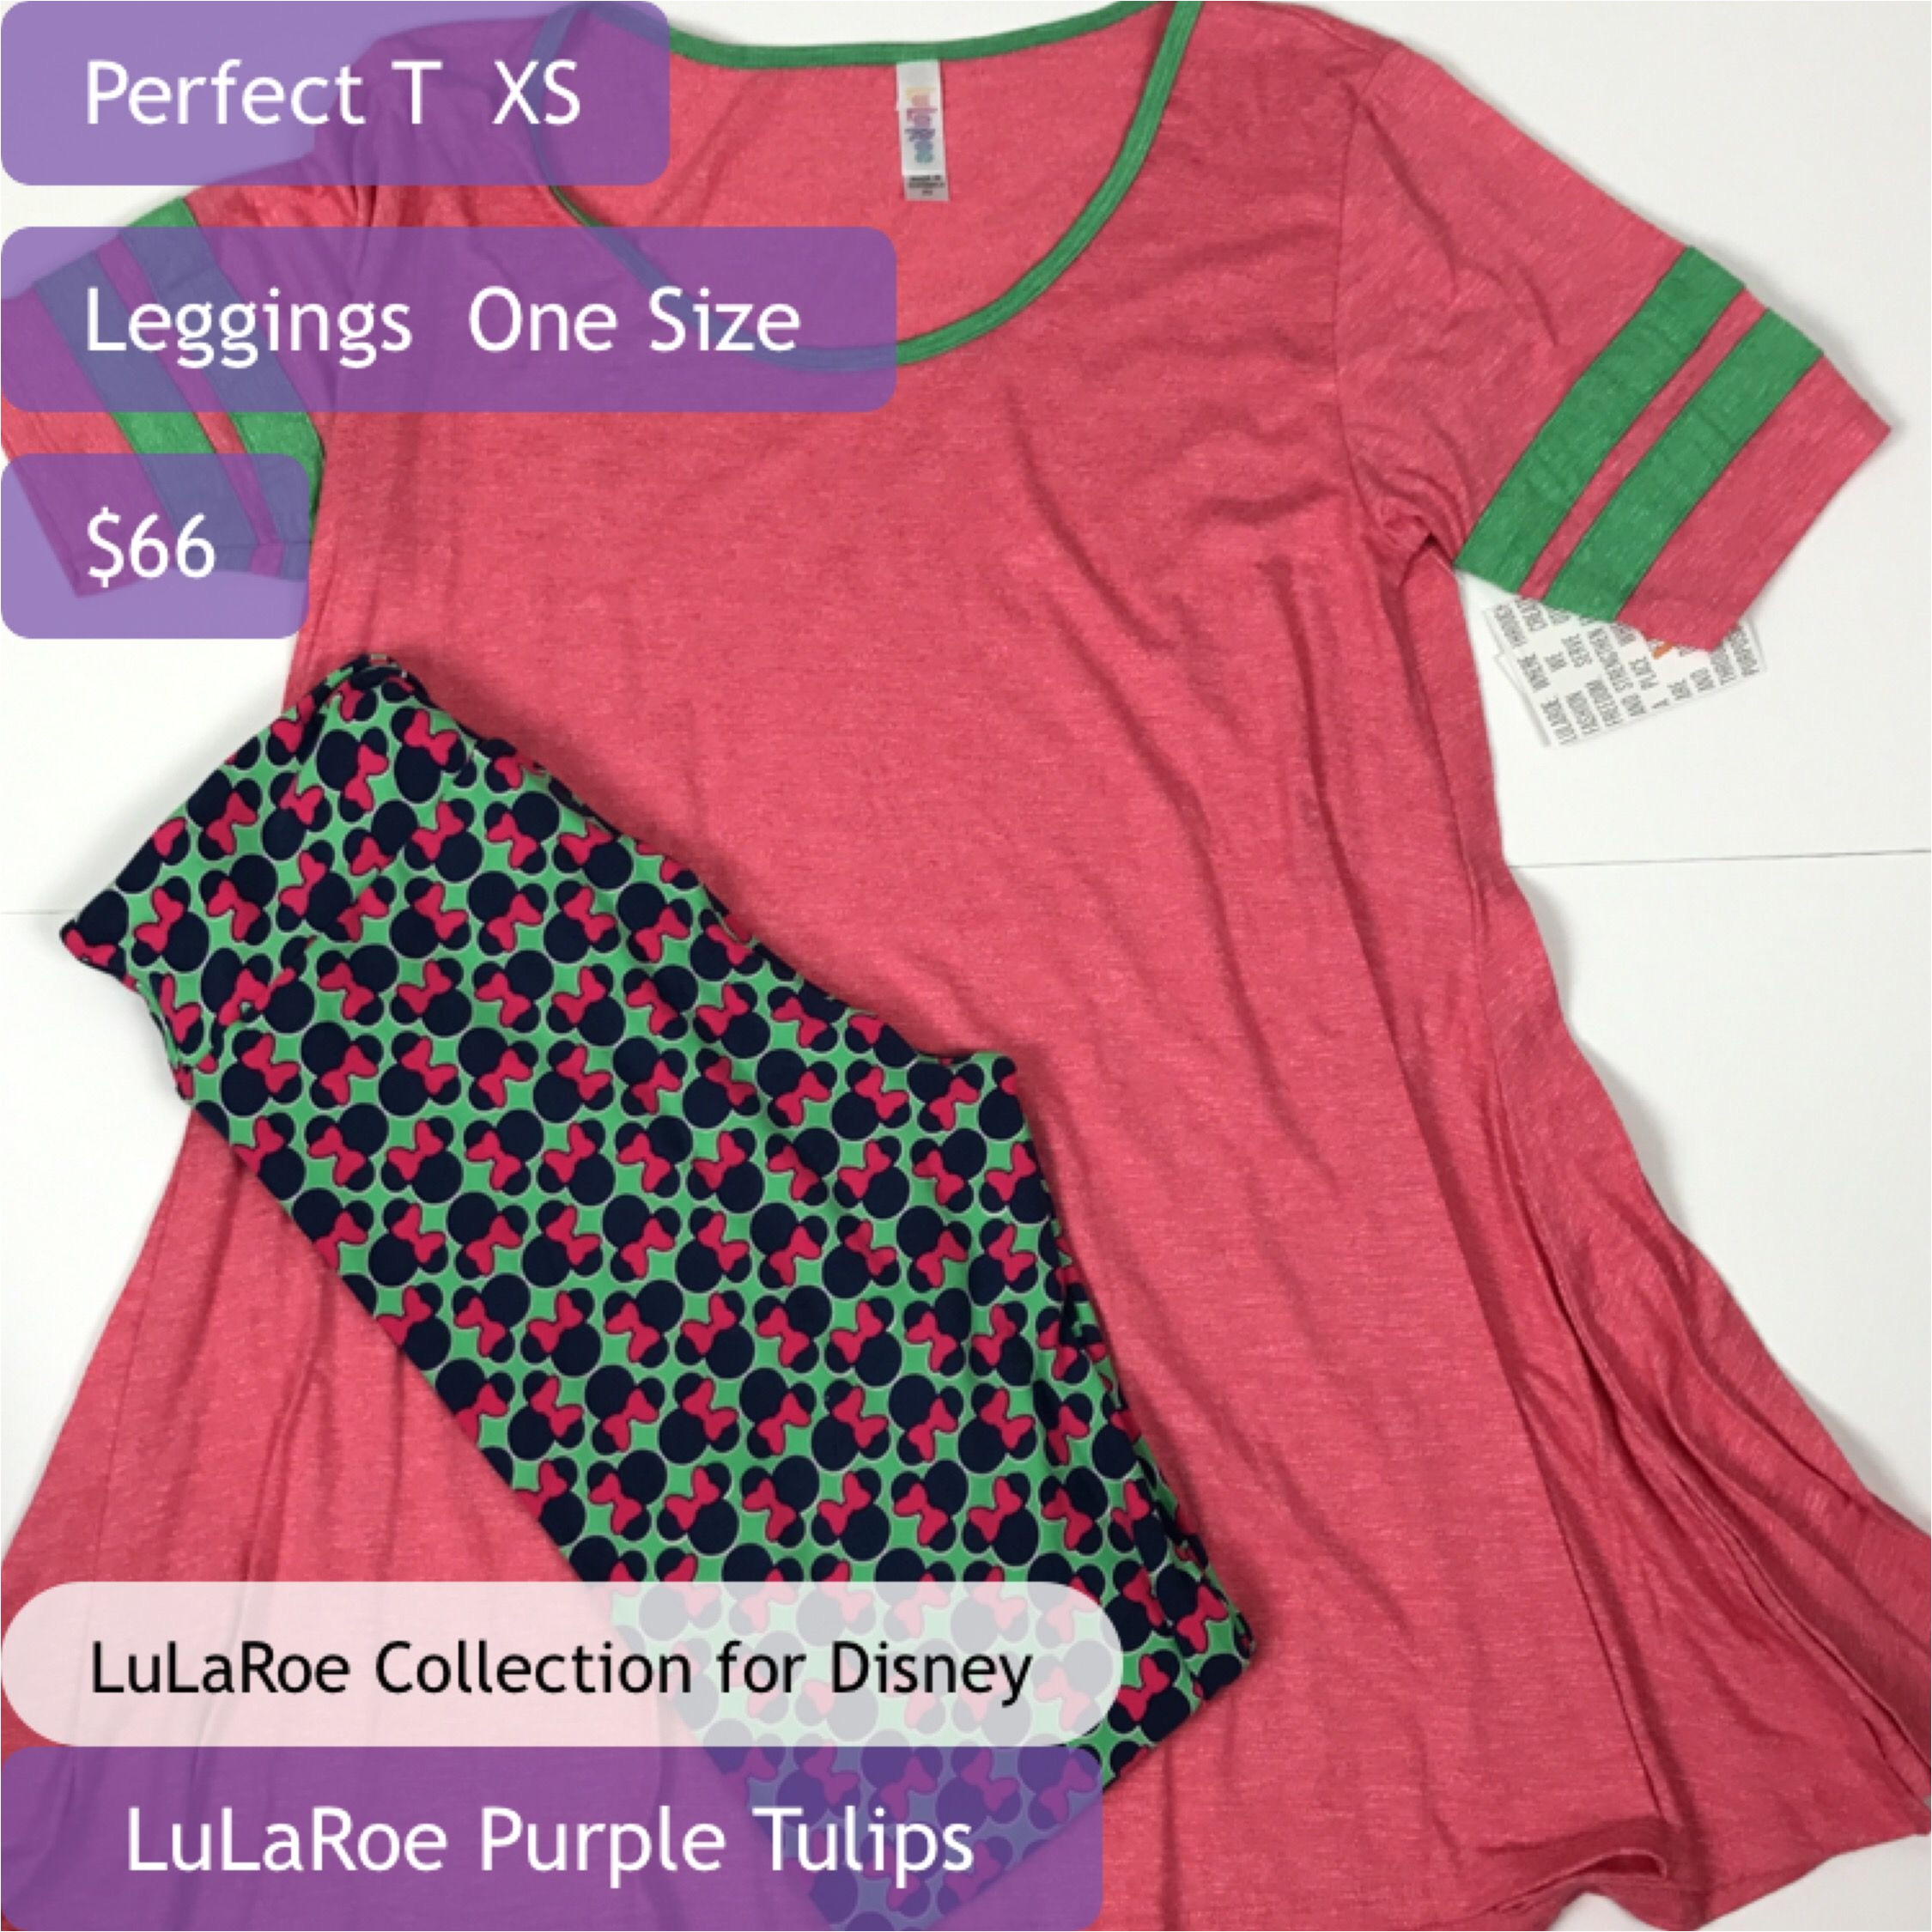 facebook com groups purpletulips lularoe collection for disney leggings and perfect t